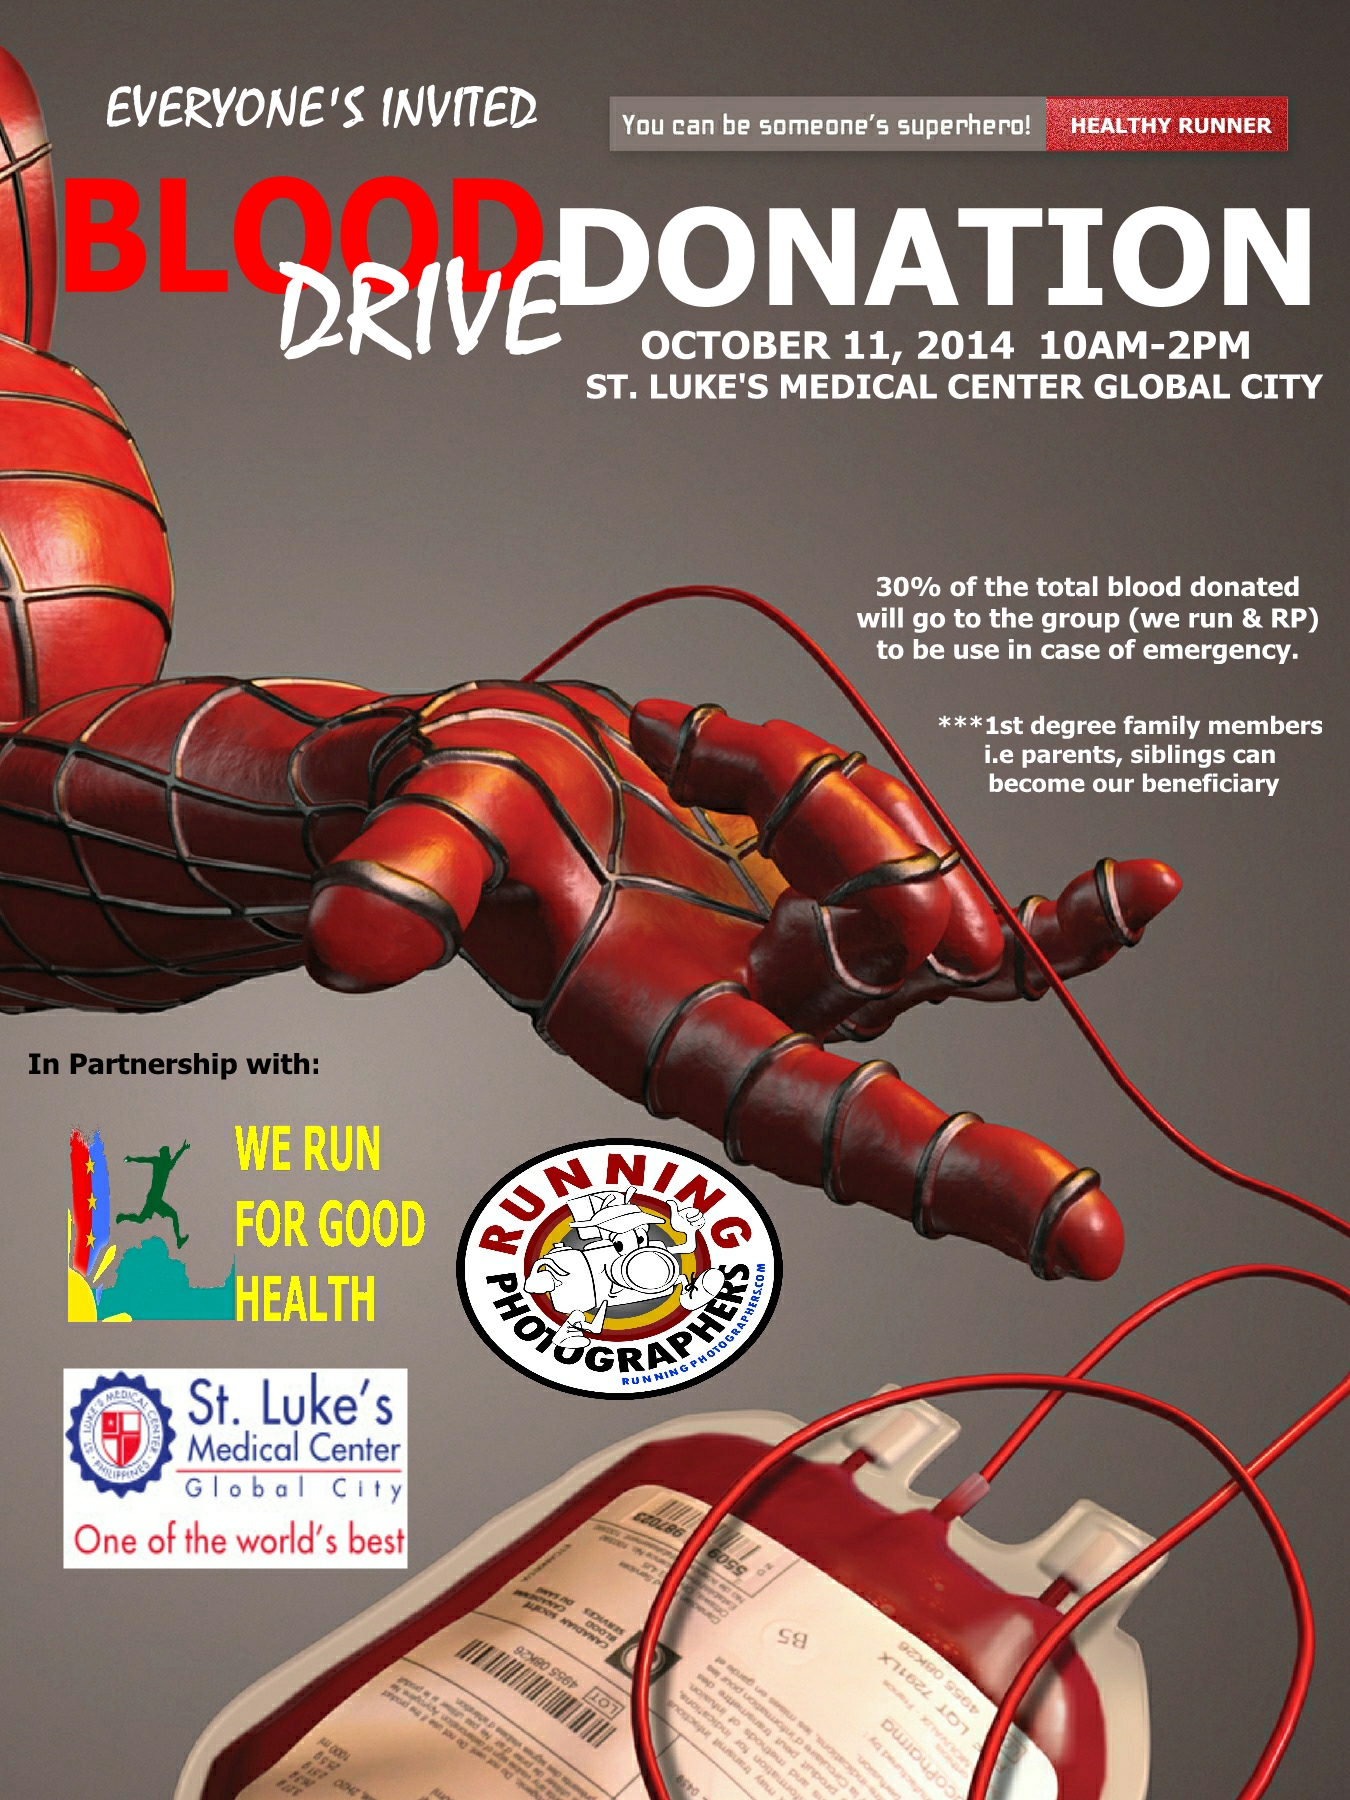 Blood Donation Drive @ St. Luke's Medical Center | Pinoy Fitness